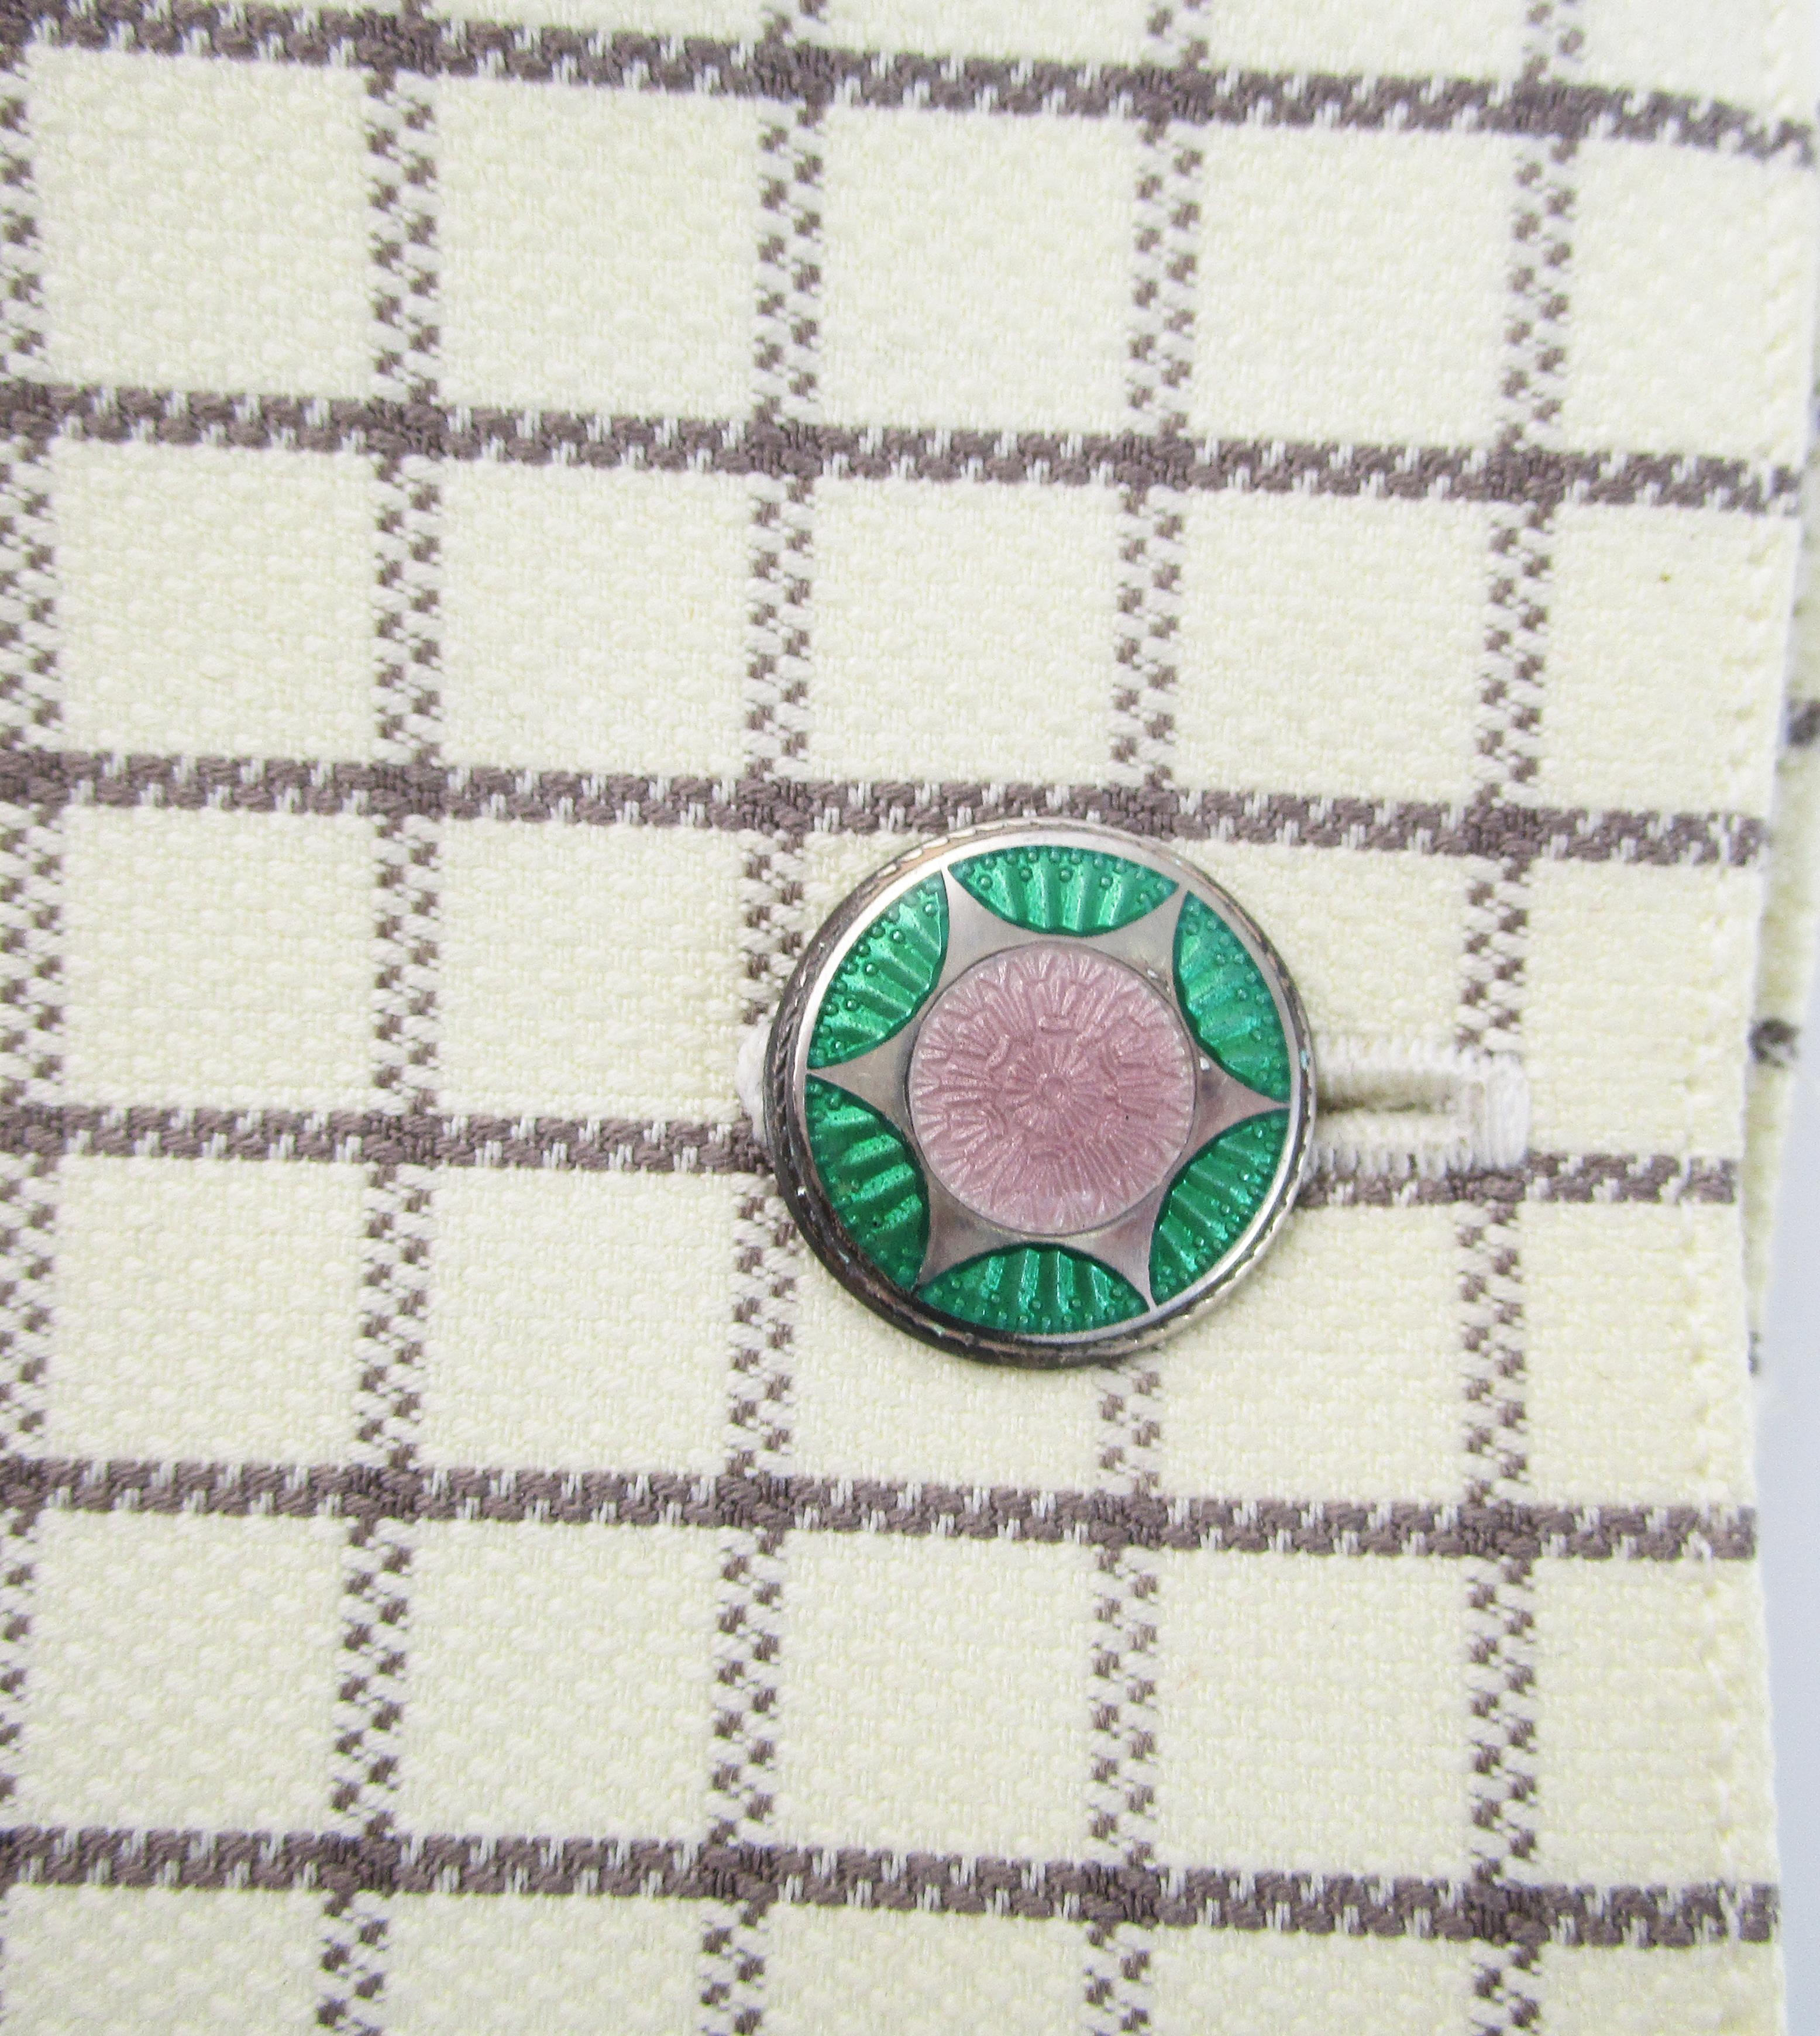 Art Deco Sterling Silver Green and White Enamel Cufflinks In Good Condition For Sale In Lexington, KY